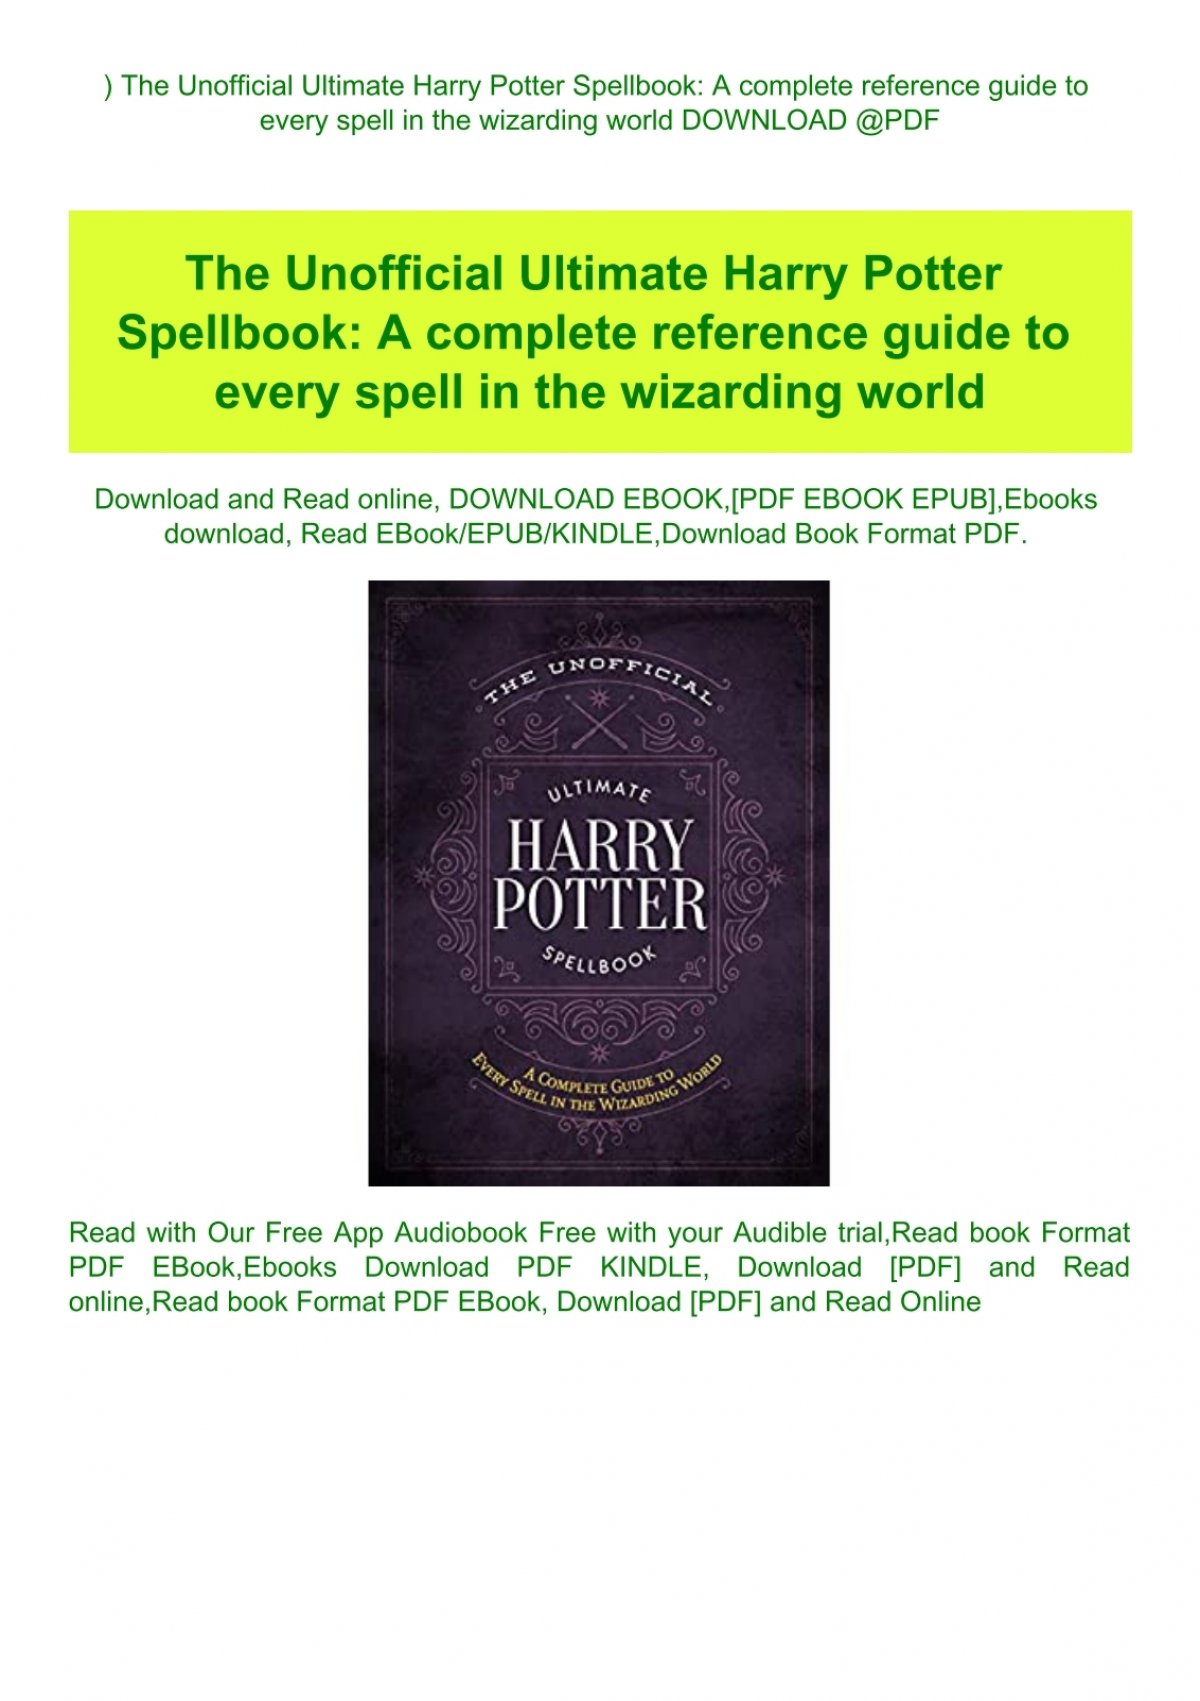 Read The Unofficial Ultimate Harry Potter Spellbook A Complete Reference Guide To Every Spell In The Wizarding World Download Pdf - free roblox 2 guide apk download books reference games and apps